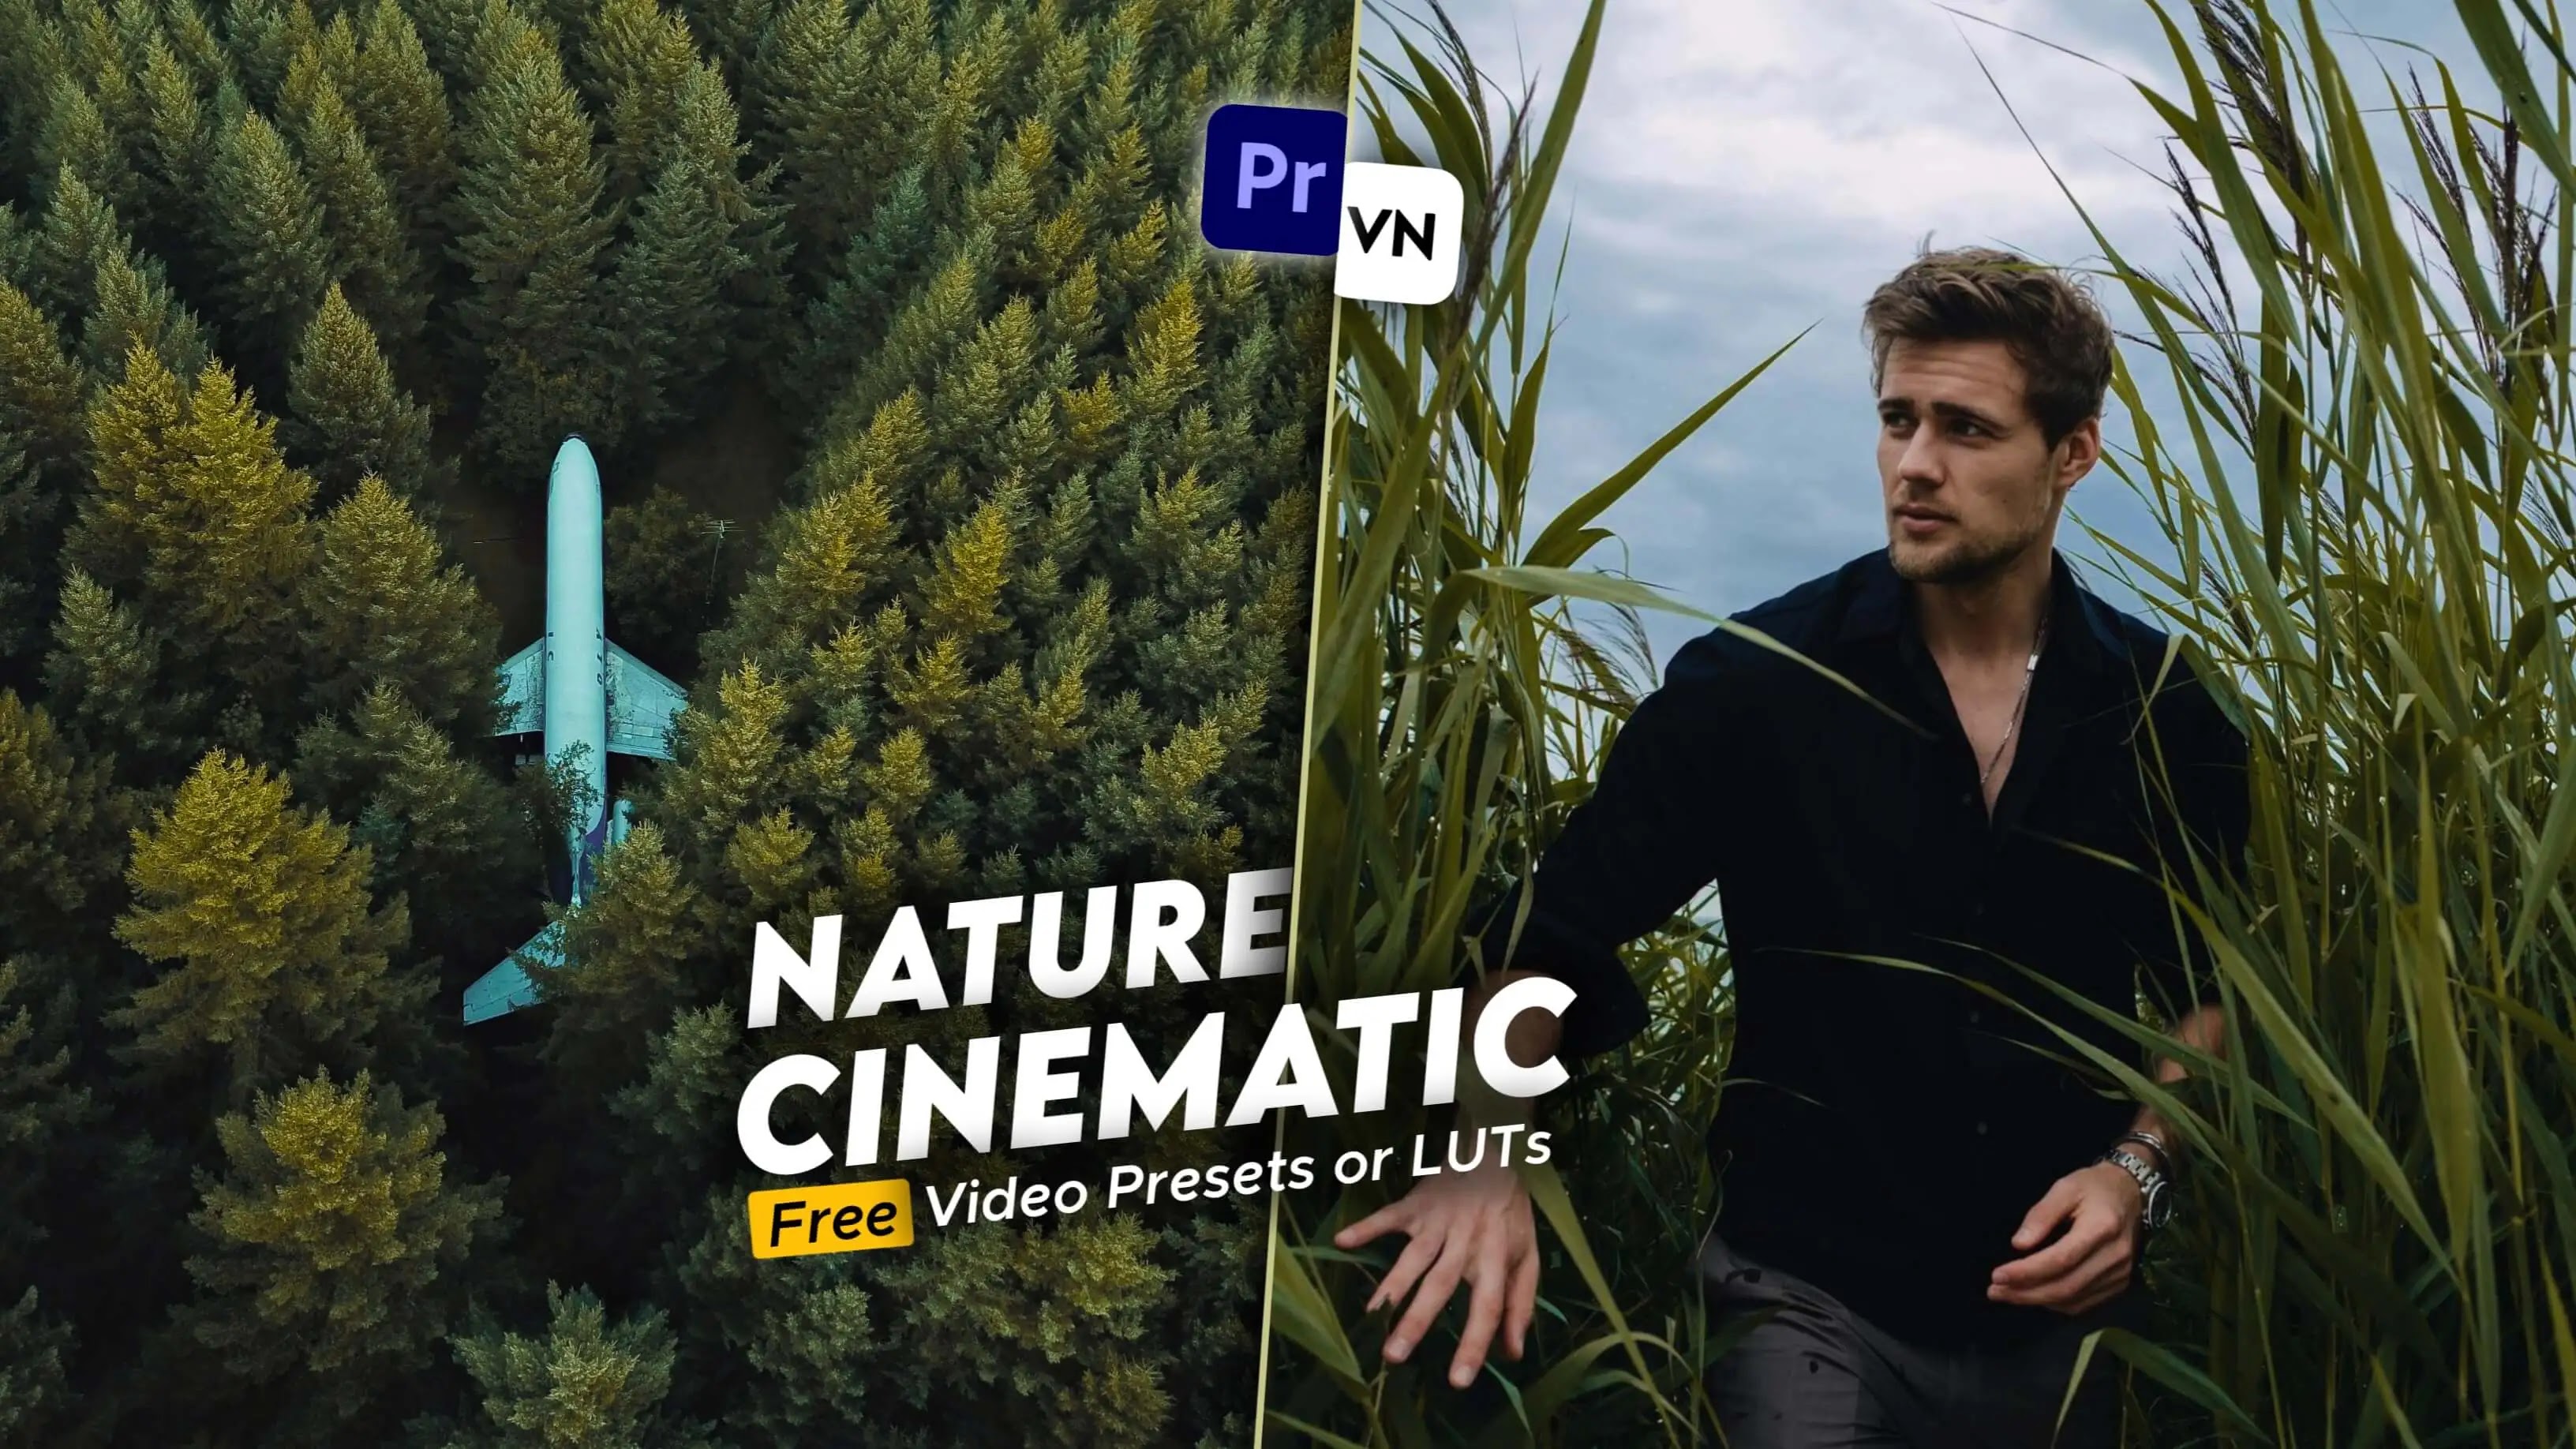 Nature Cinematic LUT Free Download, FREE Nature Cinematic Video Filters, Free Video LUTs, Free LUTs, Nature Video LUT, Cinematic Nature Video Free LUT, Free Video Filters, Amman Video LUT, Aman Free Video LUT, Amman Free Video Presets